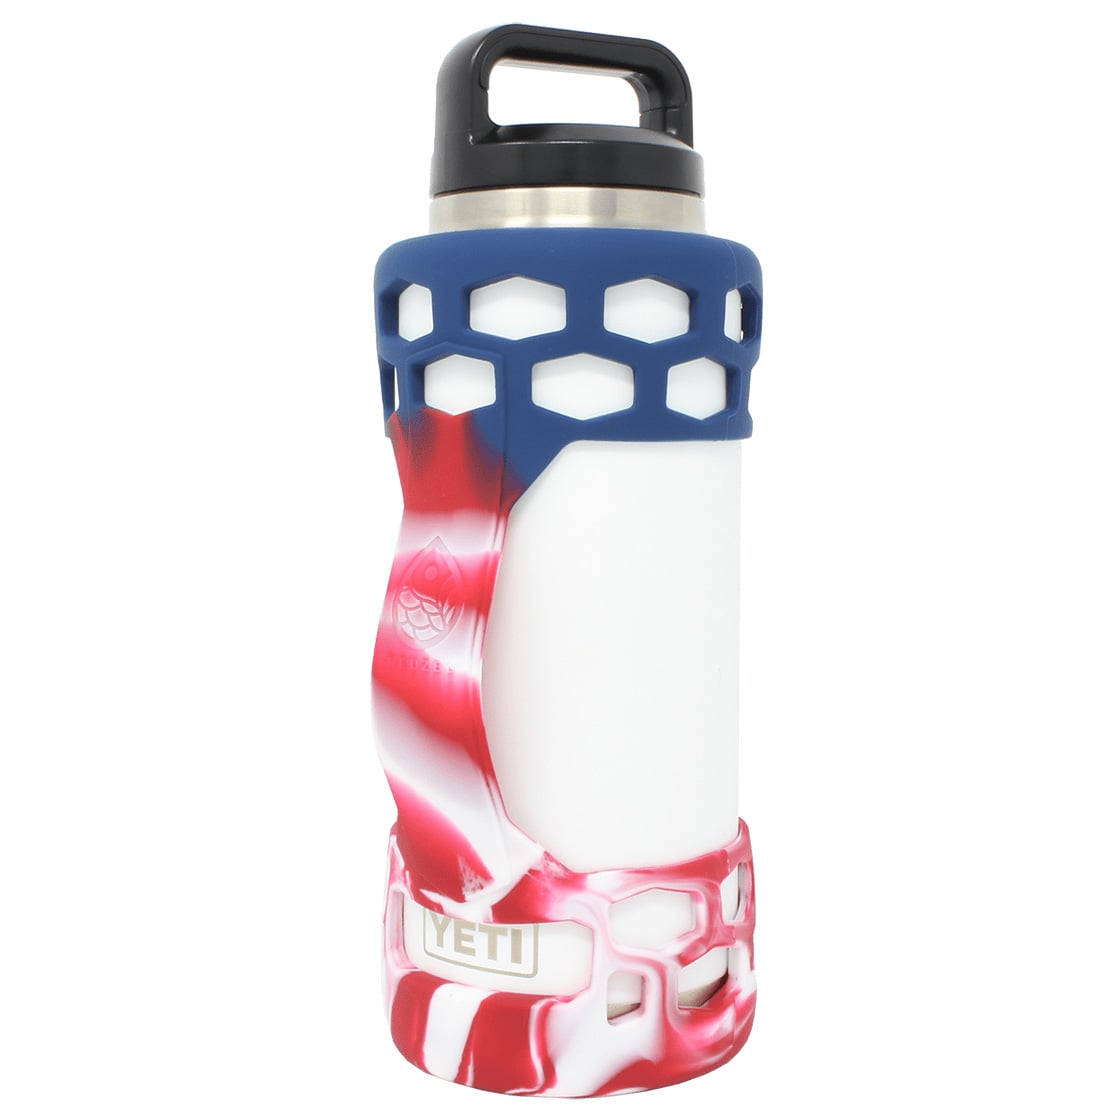 Water Bottle Holder with White Lacing and 36oz (1 Litre) White Yeti